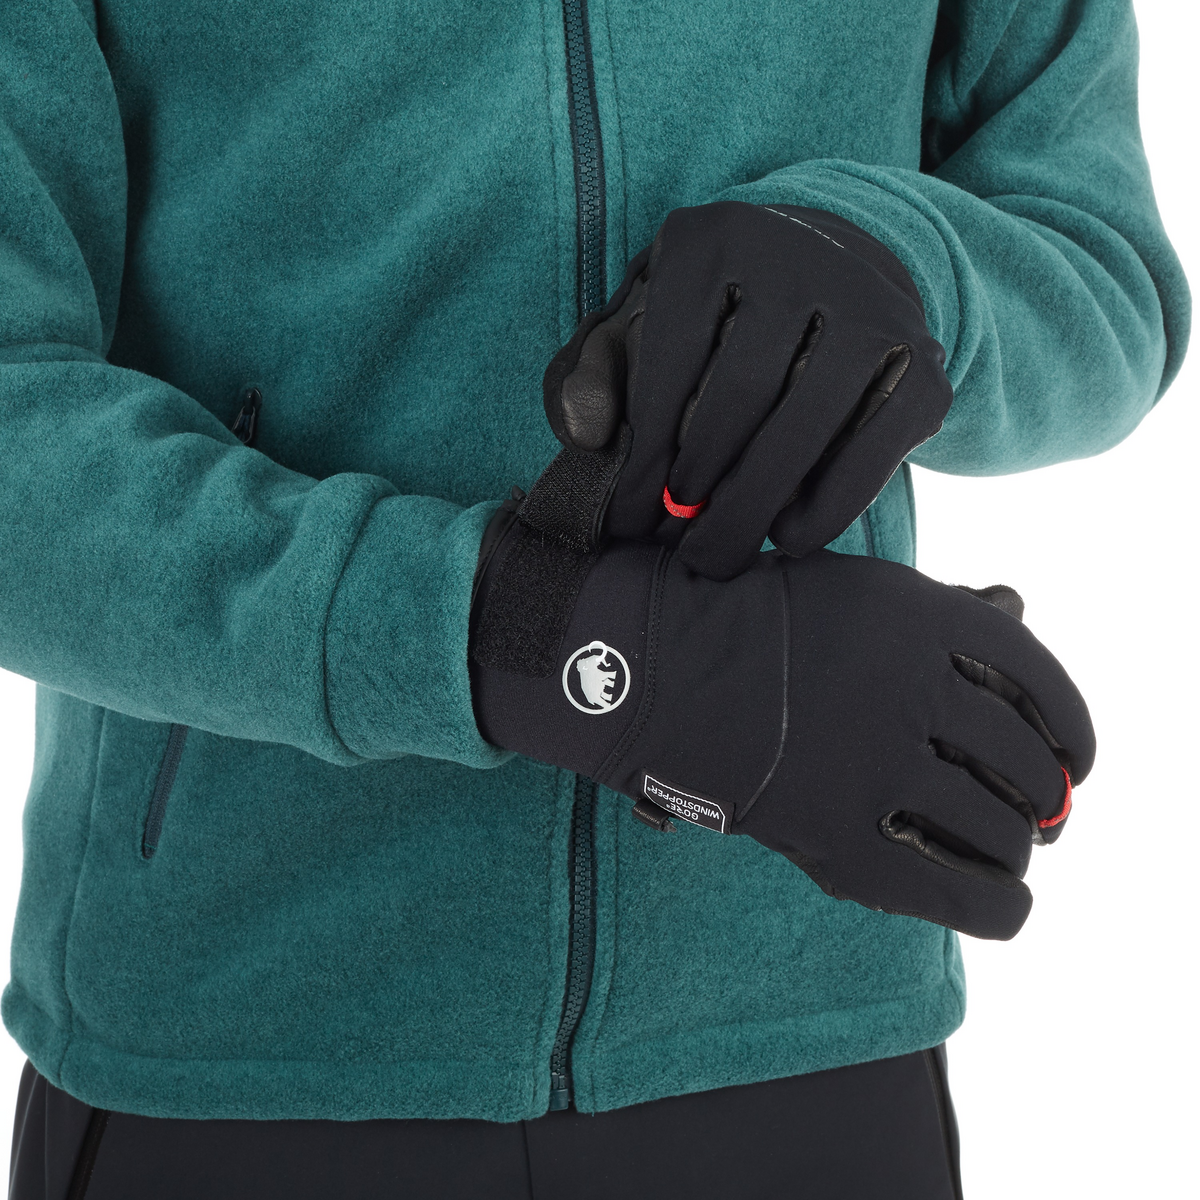 Heritage Extreme Winter Glove Size Chart